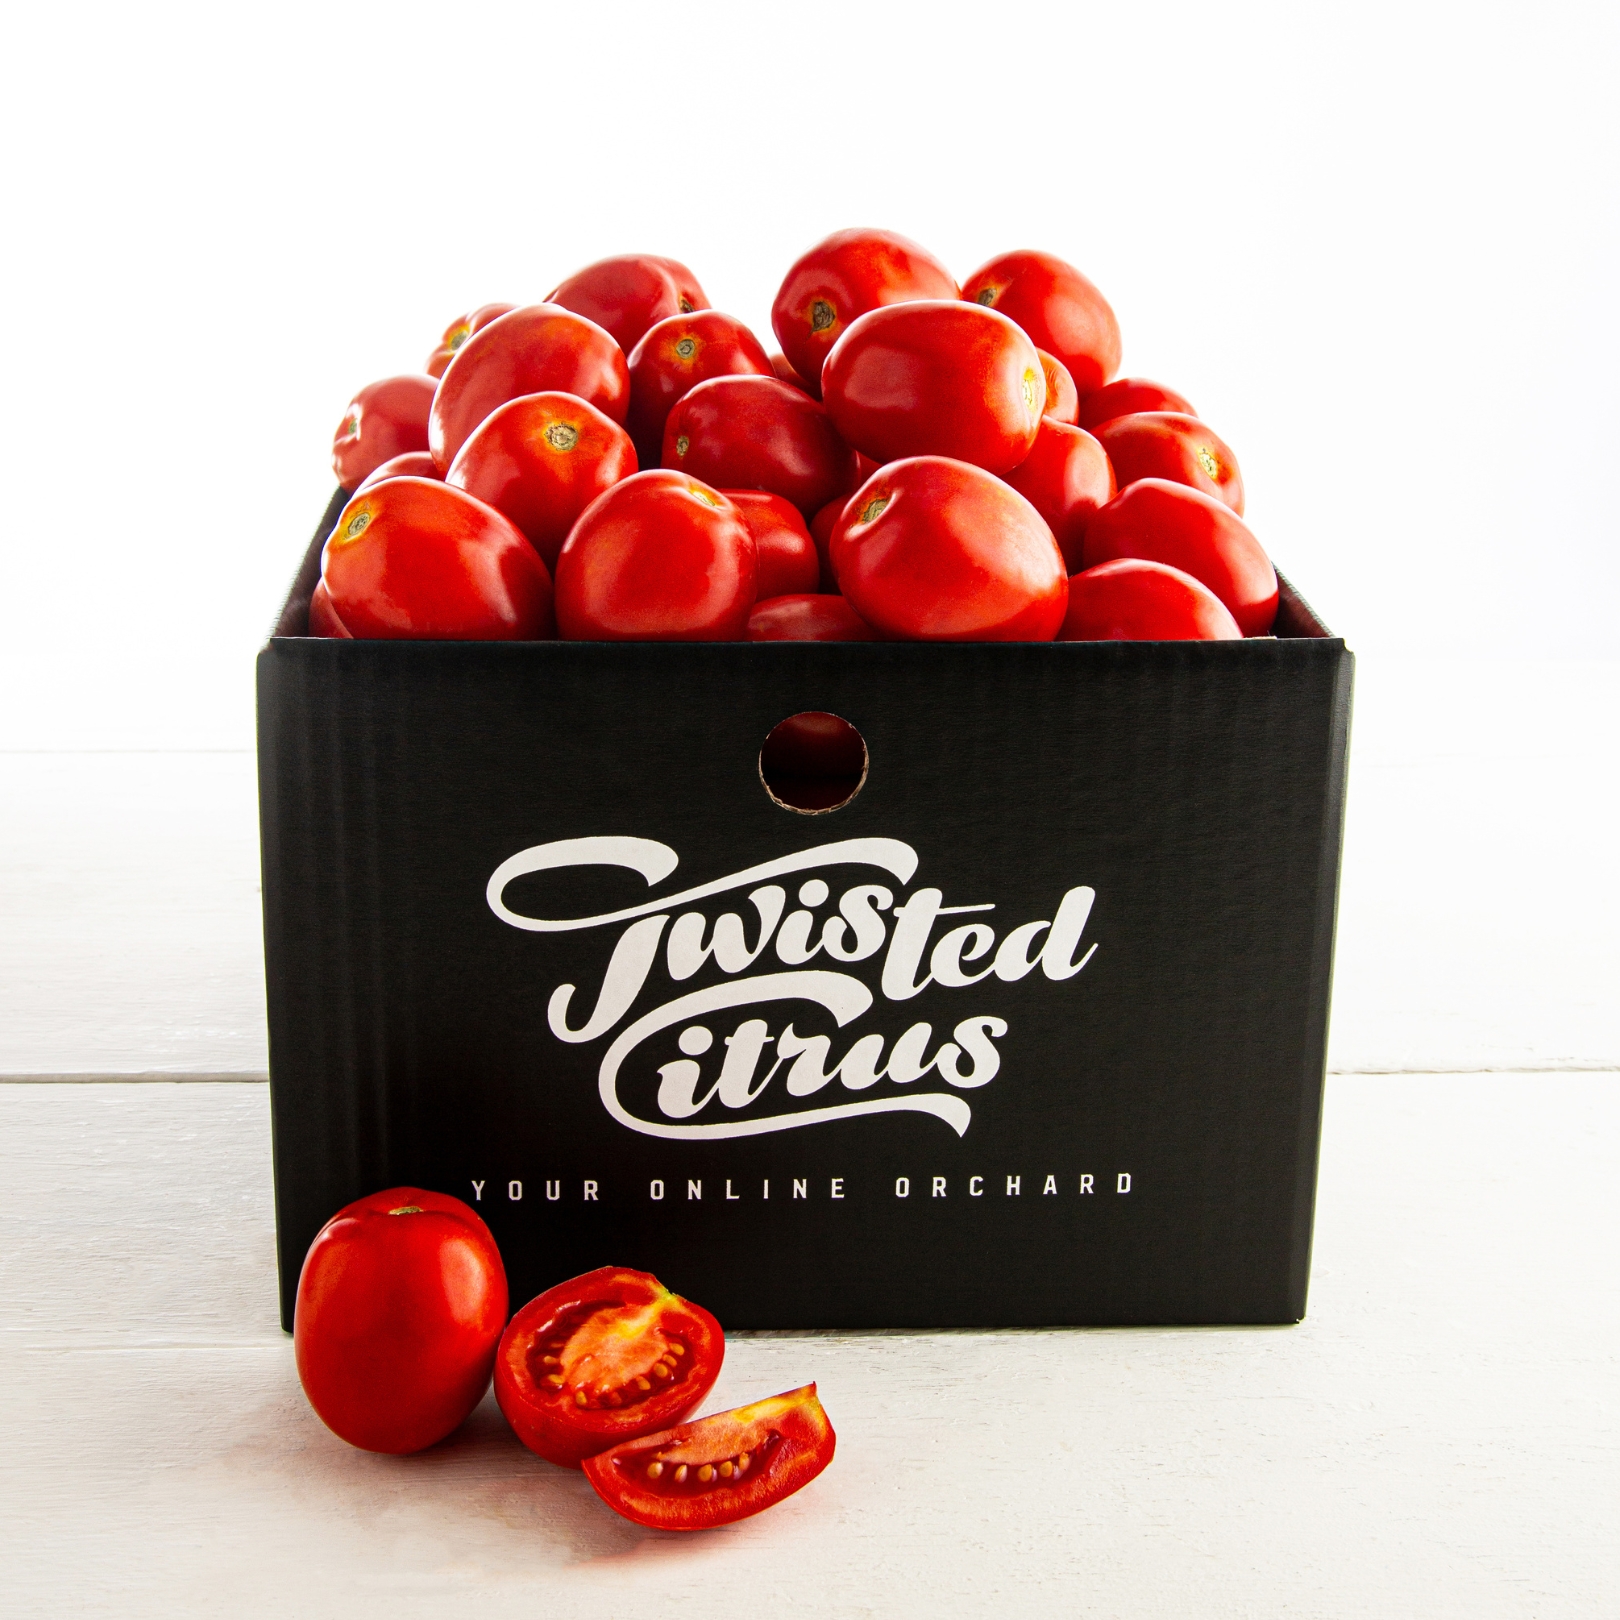 Tomatoes - Roma fruit box delivery nz